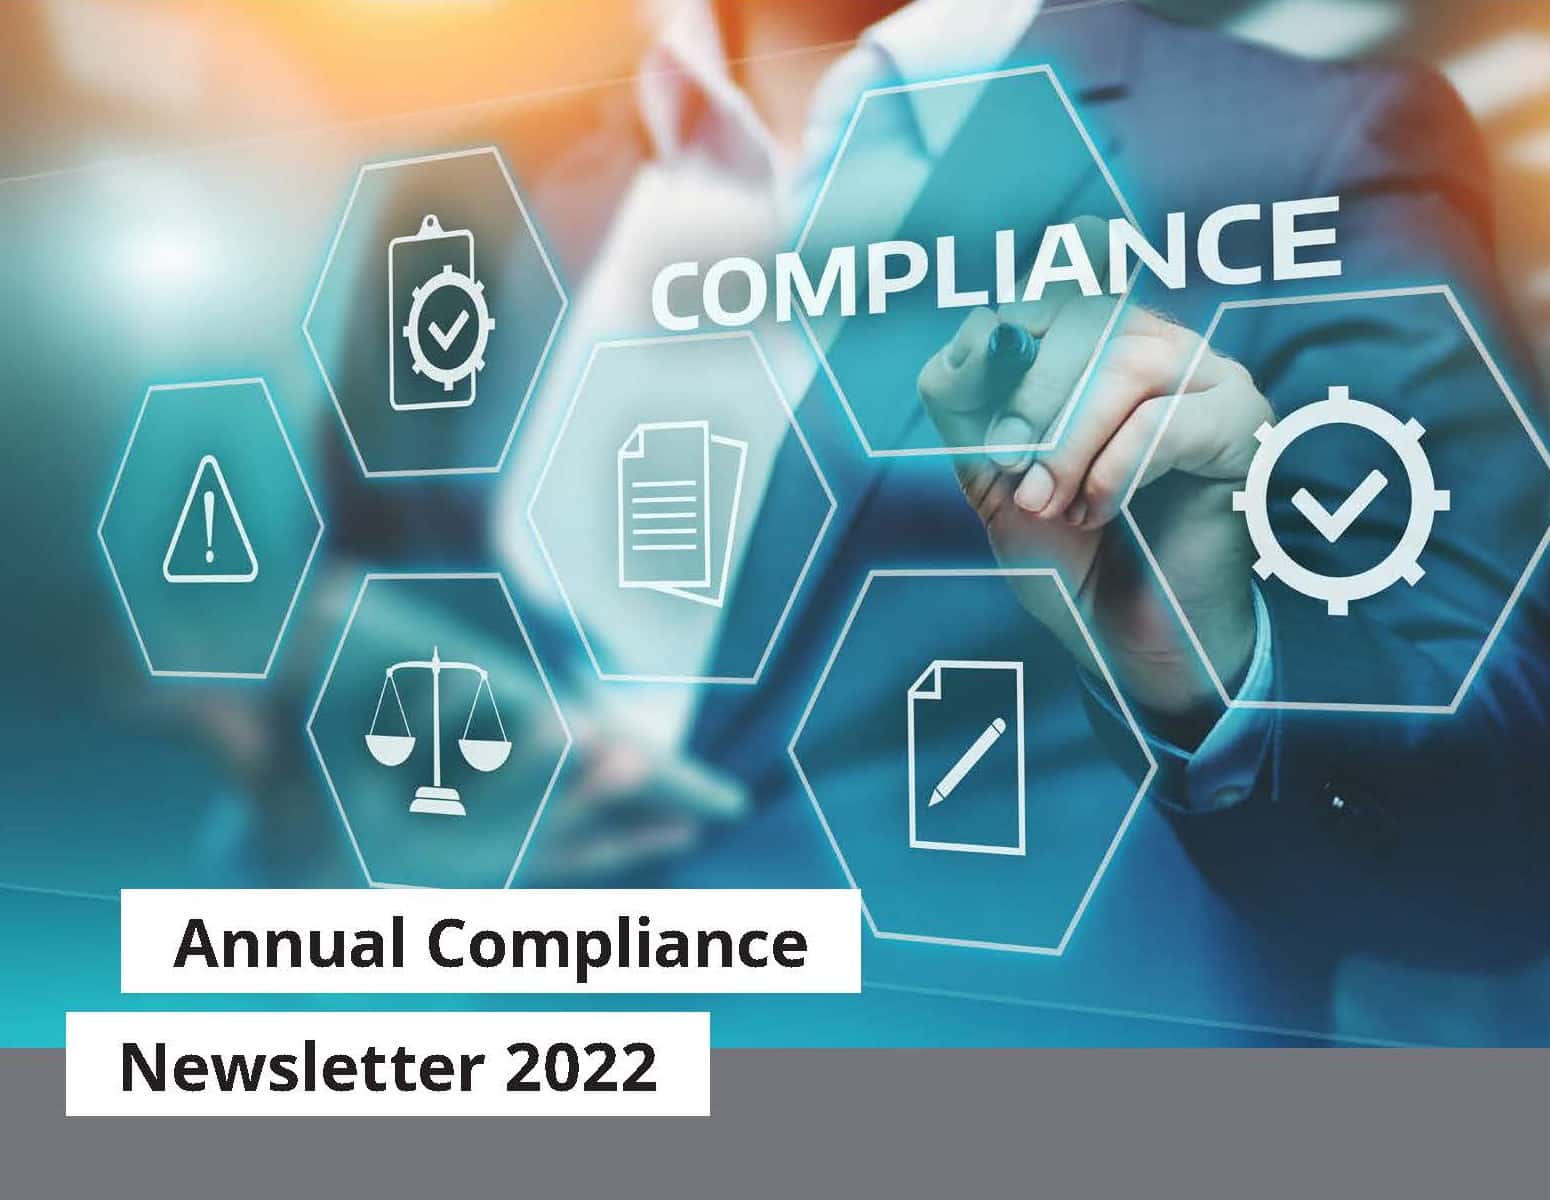 Annual Compliance Newsletter 2022